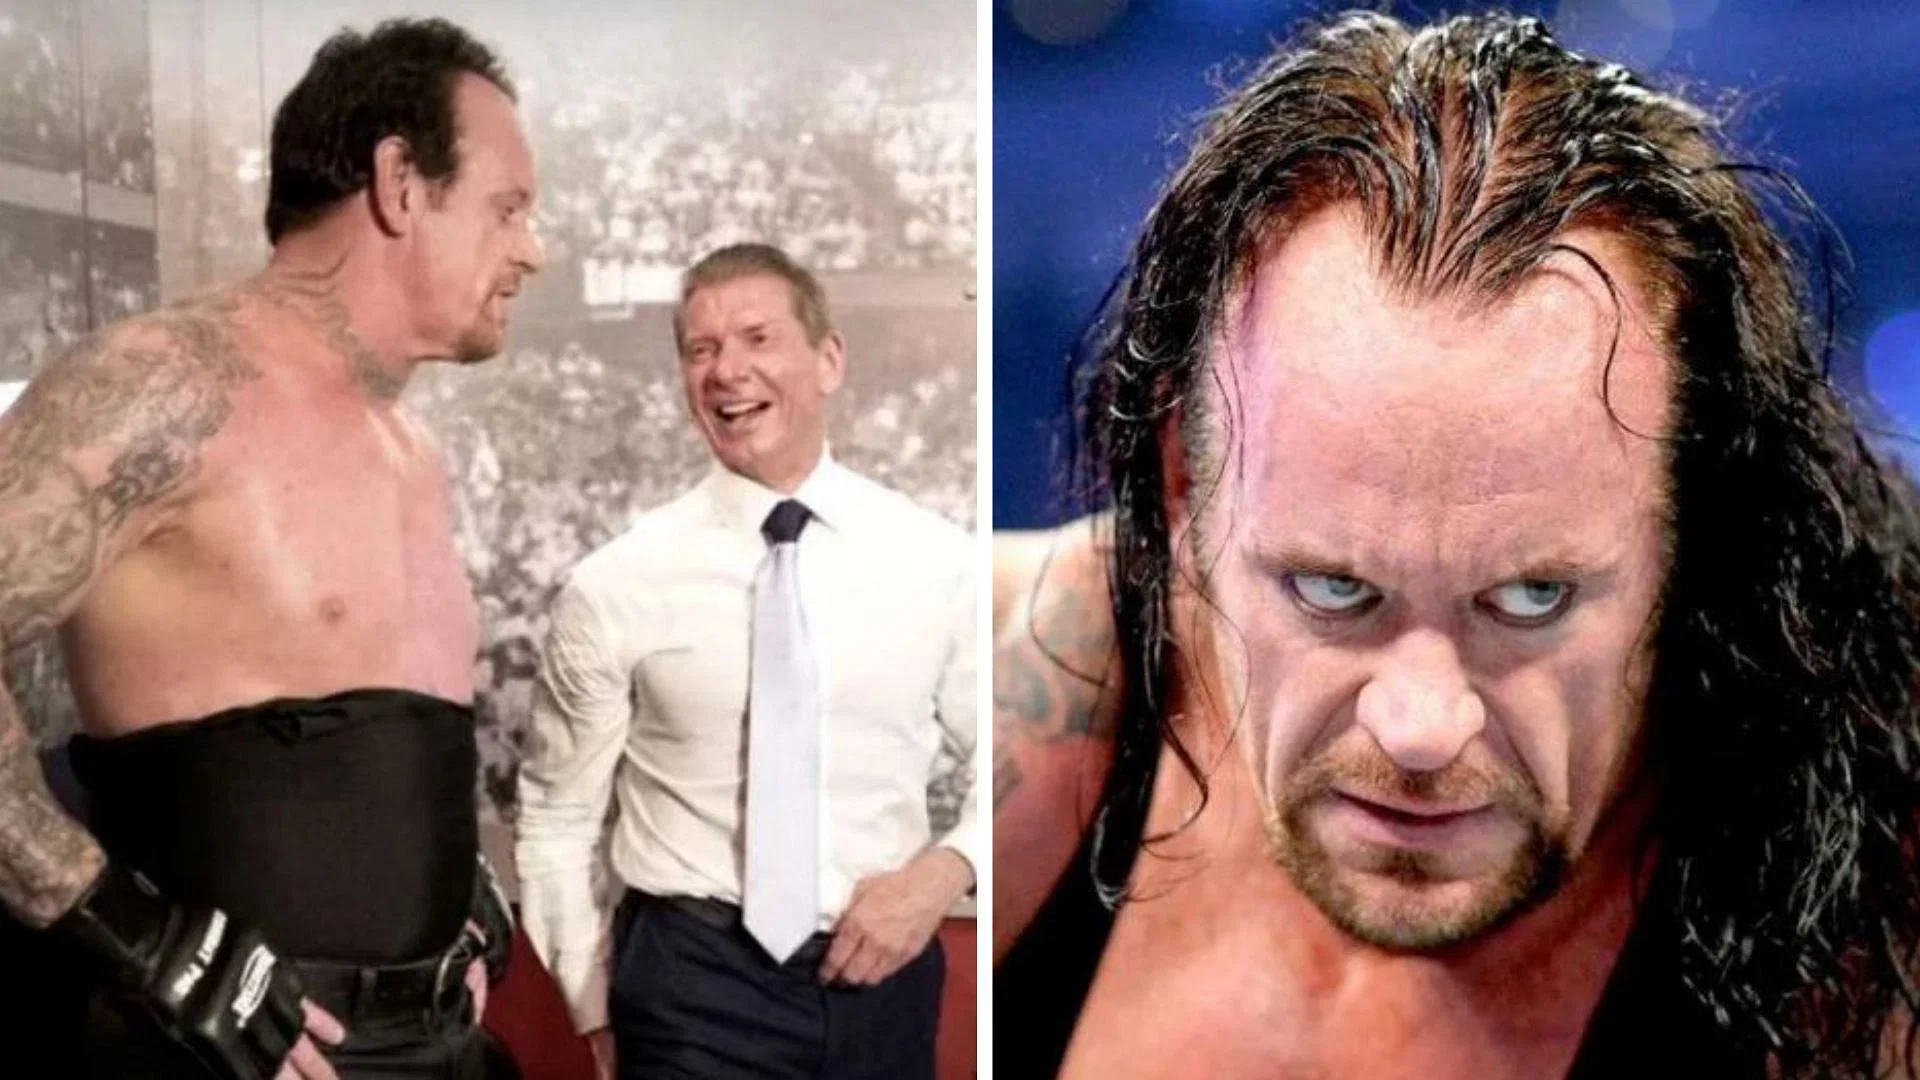 Behind the Scenes: The Undertaker's Tattoo Tale and Vince McMahon's Fury